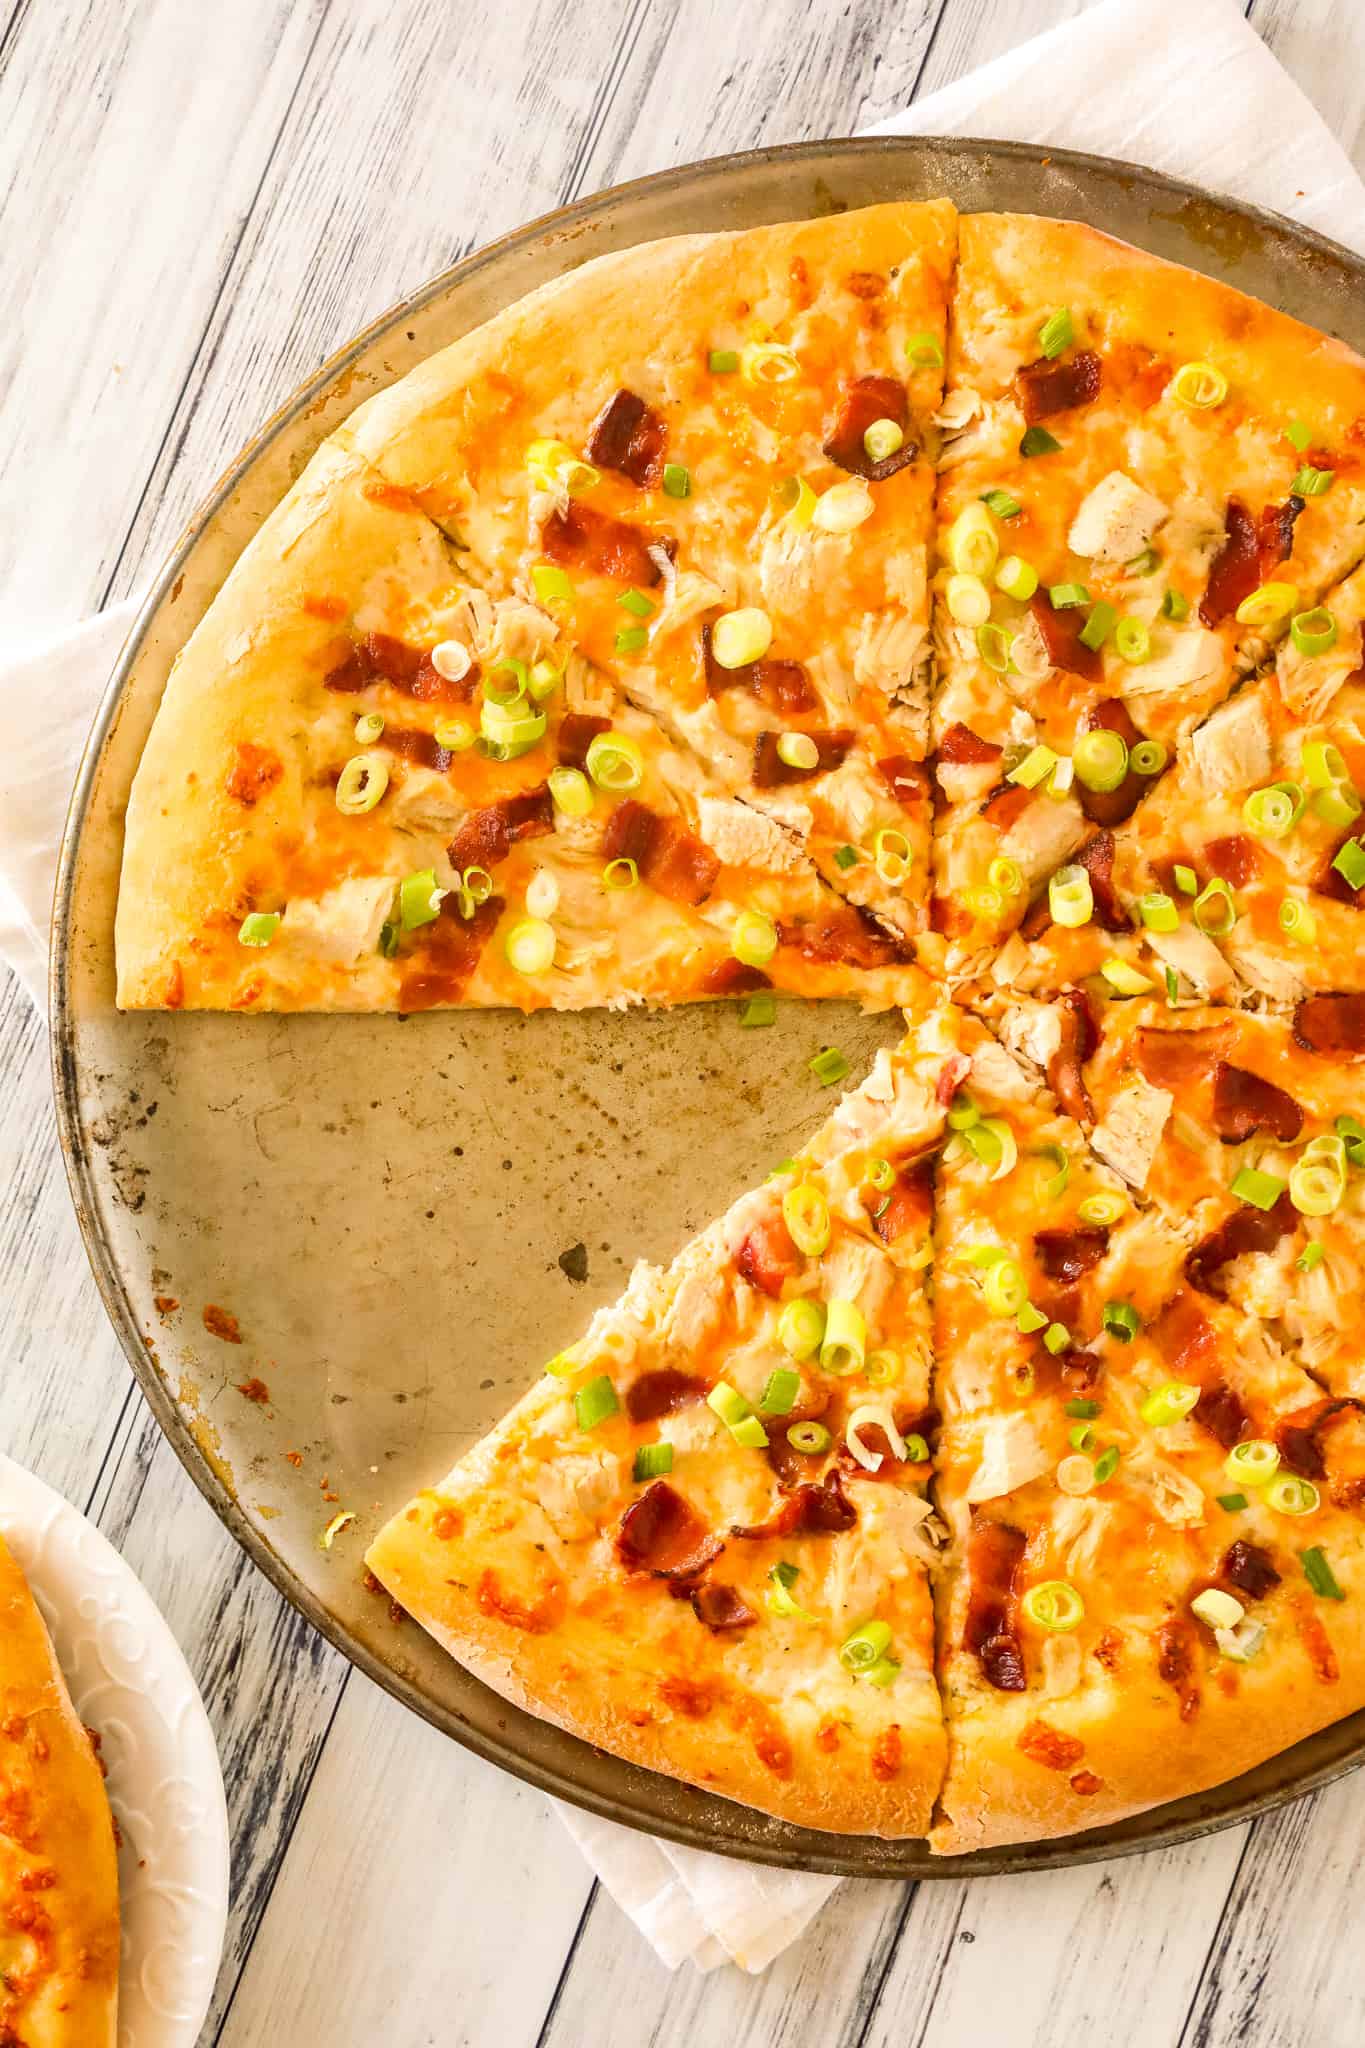 Chicken Bacon Ranch Pizza is an easy dinner recipe using store bought pizza dough loaded with ranch dressing, chicken breast chunks, bacon, chopped green onions and shredded mozzarella and cheddar cheese.